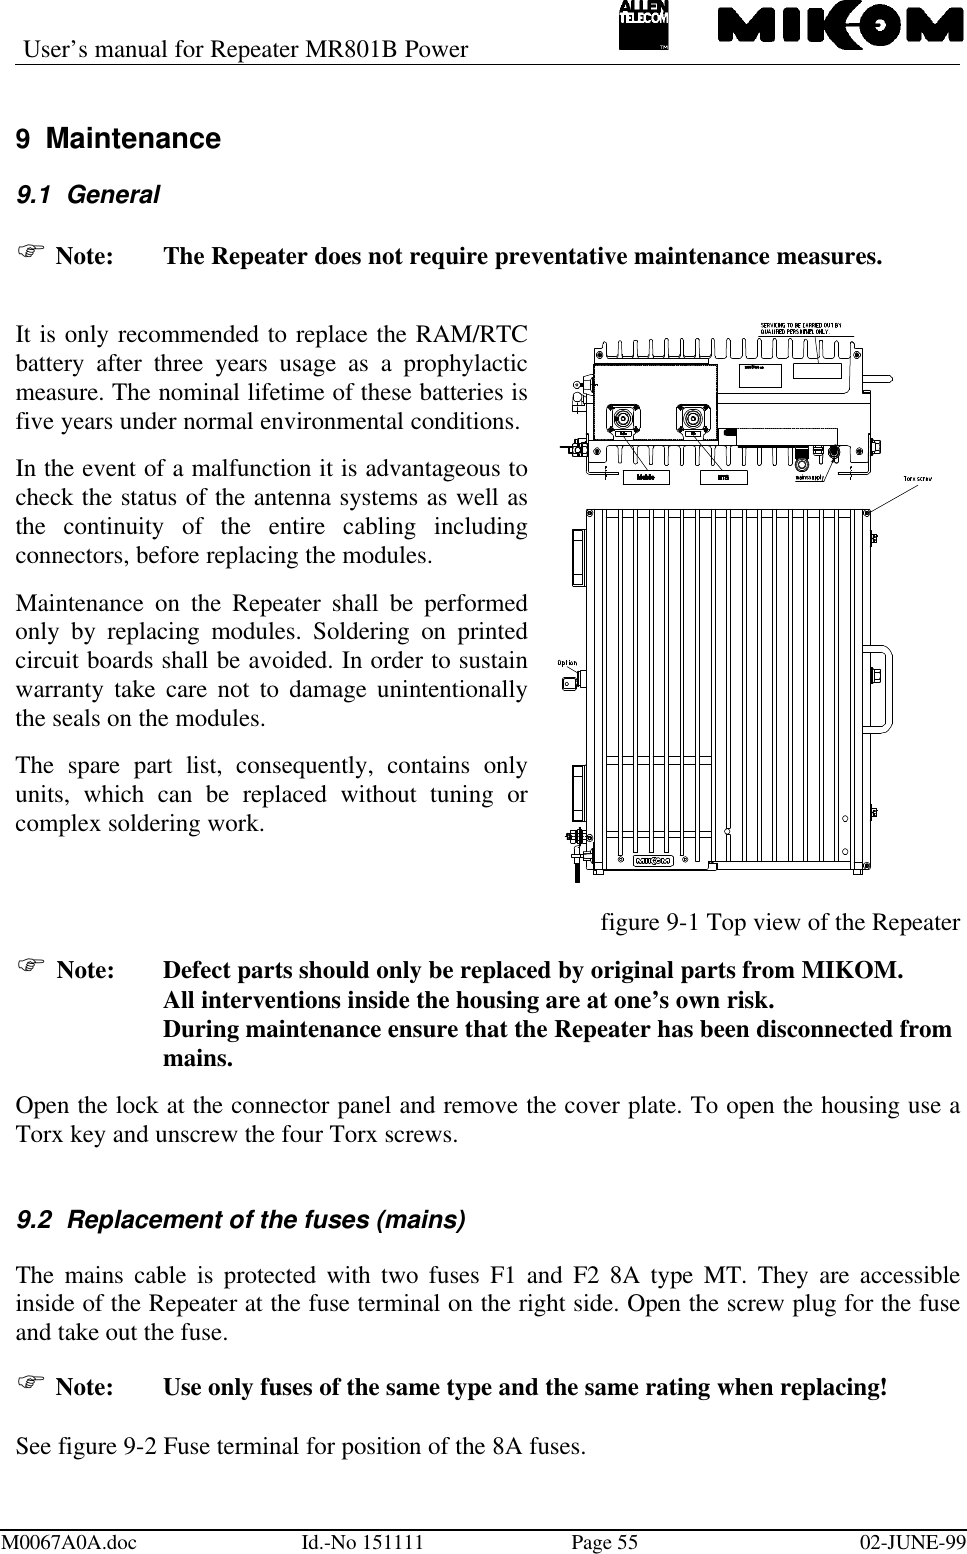 User’s manual for Repeater MR801B PowerM0067A0A.doc Id.-No 151111 Page 55 02-JUNE-999 Maintenance9.1 GeneralF Note:  The Repeater does not require preventative maintenance measures.It is only recommended to replace the RAM/RTCbattery after three years usage as a prophylacticmeasure. The nominal lifetime of these batteries isfive years under normal environmental conditions.In the event of a malfunction it is advantageous tocheck the status of the antenna systems as well asthe continuity of the entire cabling includingconnectors, before replacing the modules.Maintenance on the Repeater shall be performedonly by replacing modules. Soldering on printedcircuit boards shall be avoided. In order to sustainwarranty take care not to damage unintentionallythe seals on the modules.The spare part list, consequently, contains onlyunits, which can be replaced without tuning orcomplex soldering work.figure 9-1 Top view of the RepeaterF Note:  Defect parts should only be replaced by original parts from MIKOM.All interventions inside the housing are at one’s own risk.During maintenance ensure that the Repeater has been disconnected frommains.Open the lock at the connector panel and remove the cover plate. To open the housing use aTorx key and unscrew the four Torx screws.9.2 Replacement of the fuses (mains)The mains cable is protected with two fuses F1 and F2 8A type MT. They are accessibleinside of the Repeater at the fuse terminal on the right side. Open the screw plug for the fuseand take out the fuse.F Note:  Use only fuses of the same type and the same rating when replacing!See figure 9-2 Fuse terminal for position of the 8A fuses.